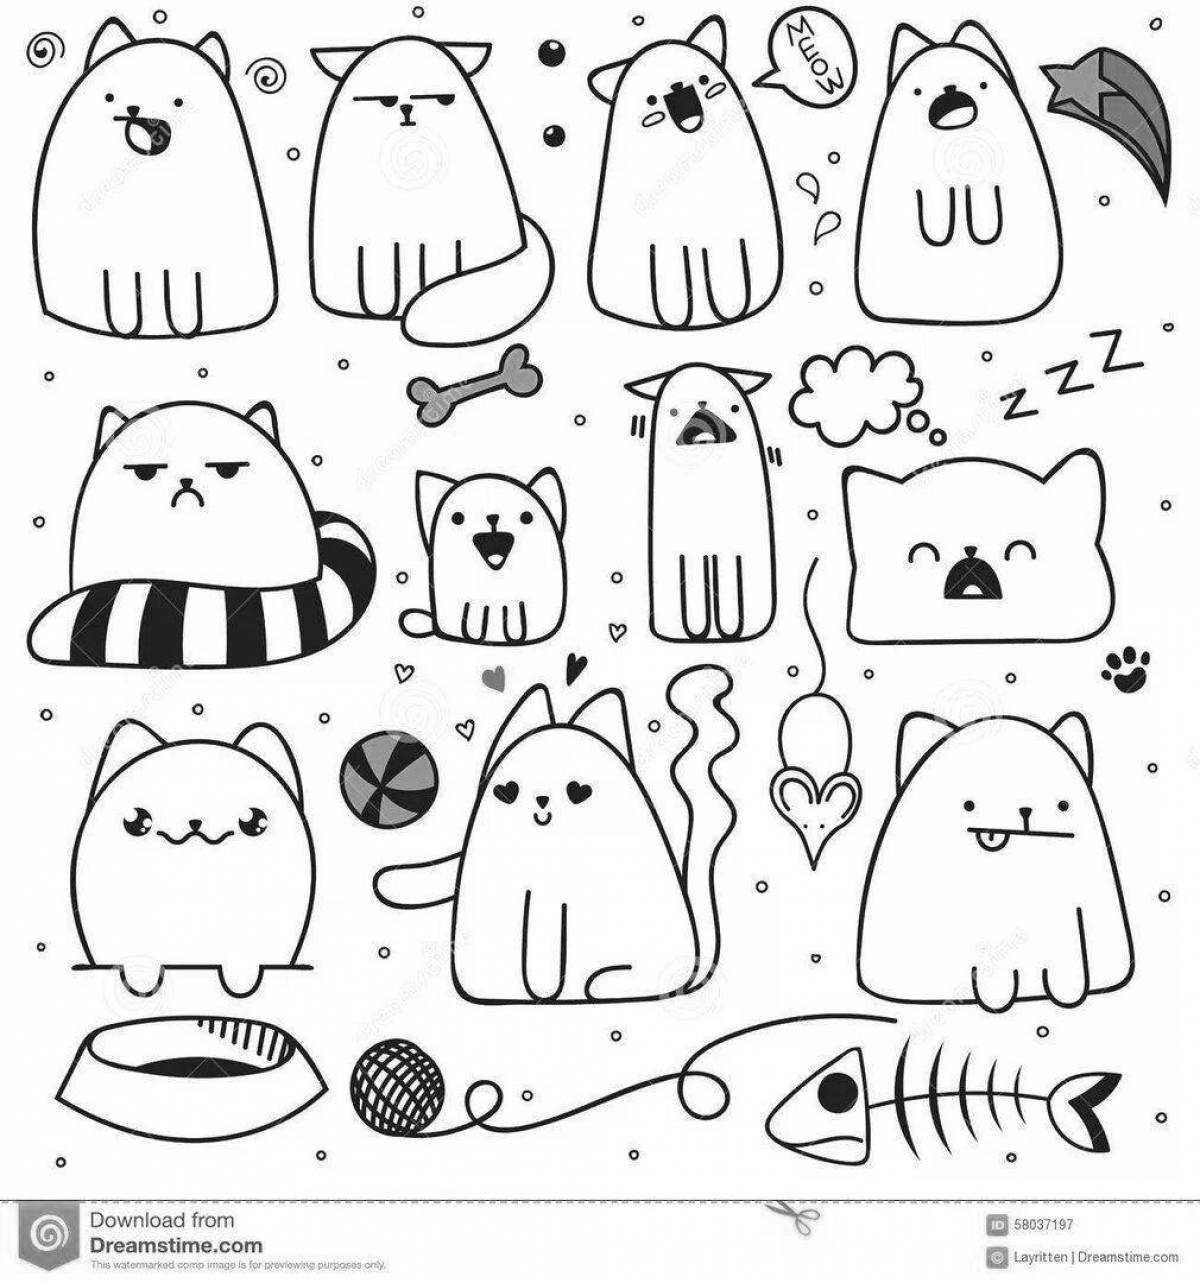 Cats small for stickers #4